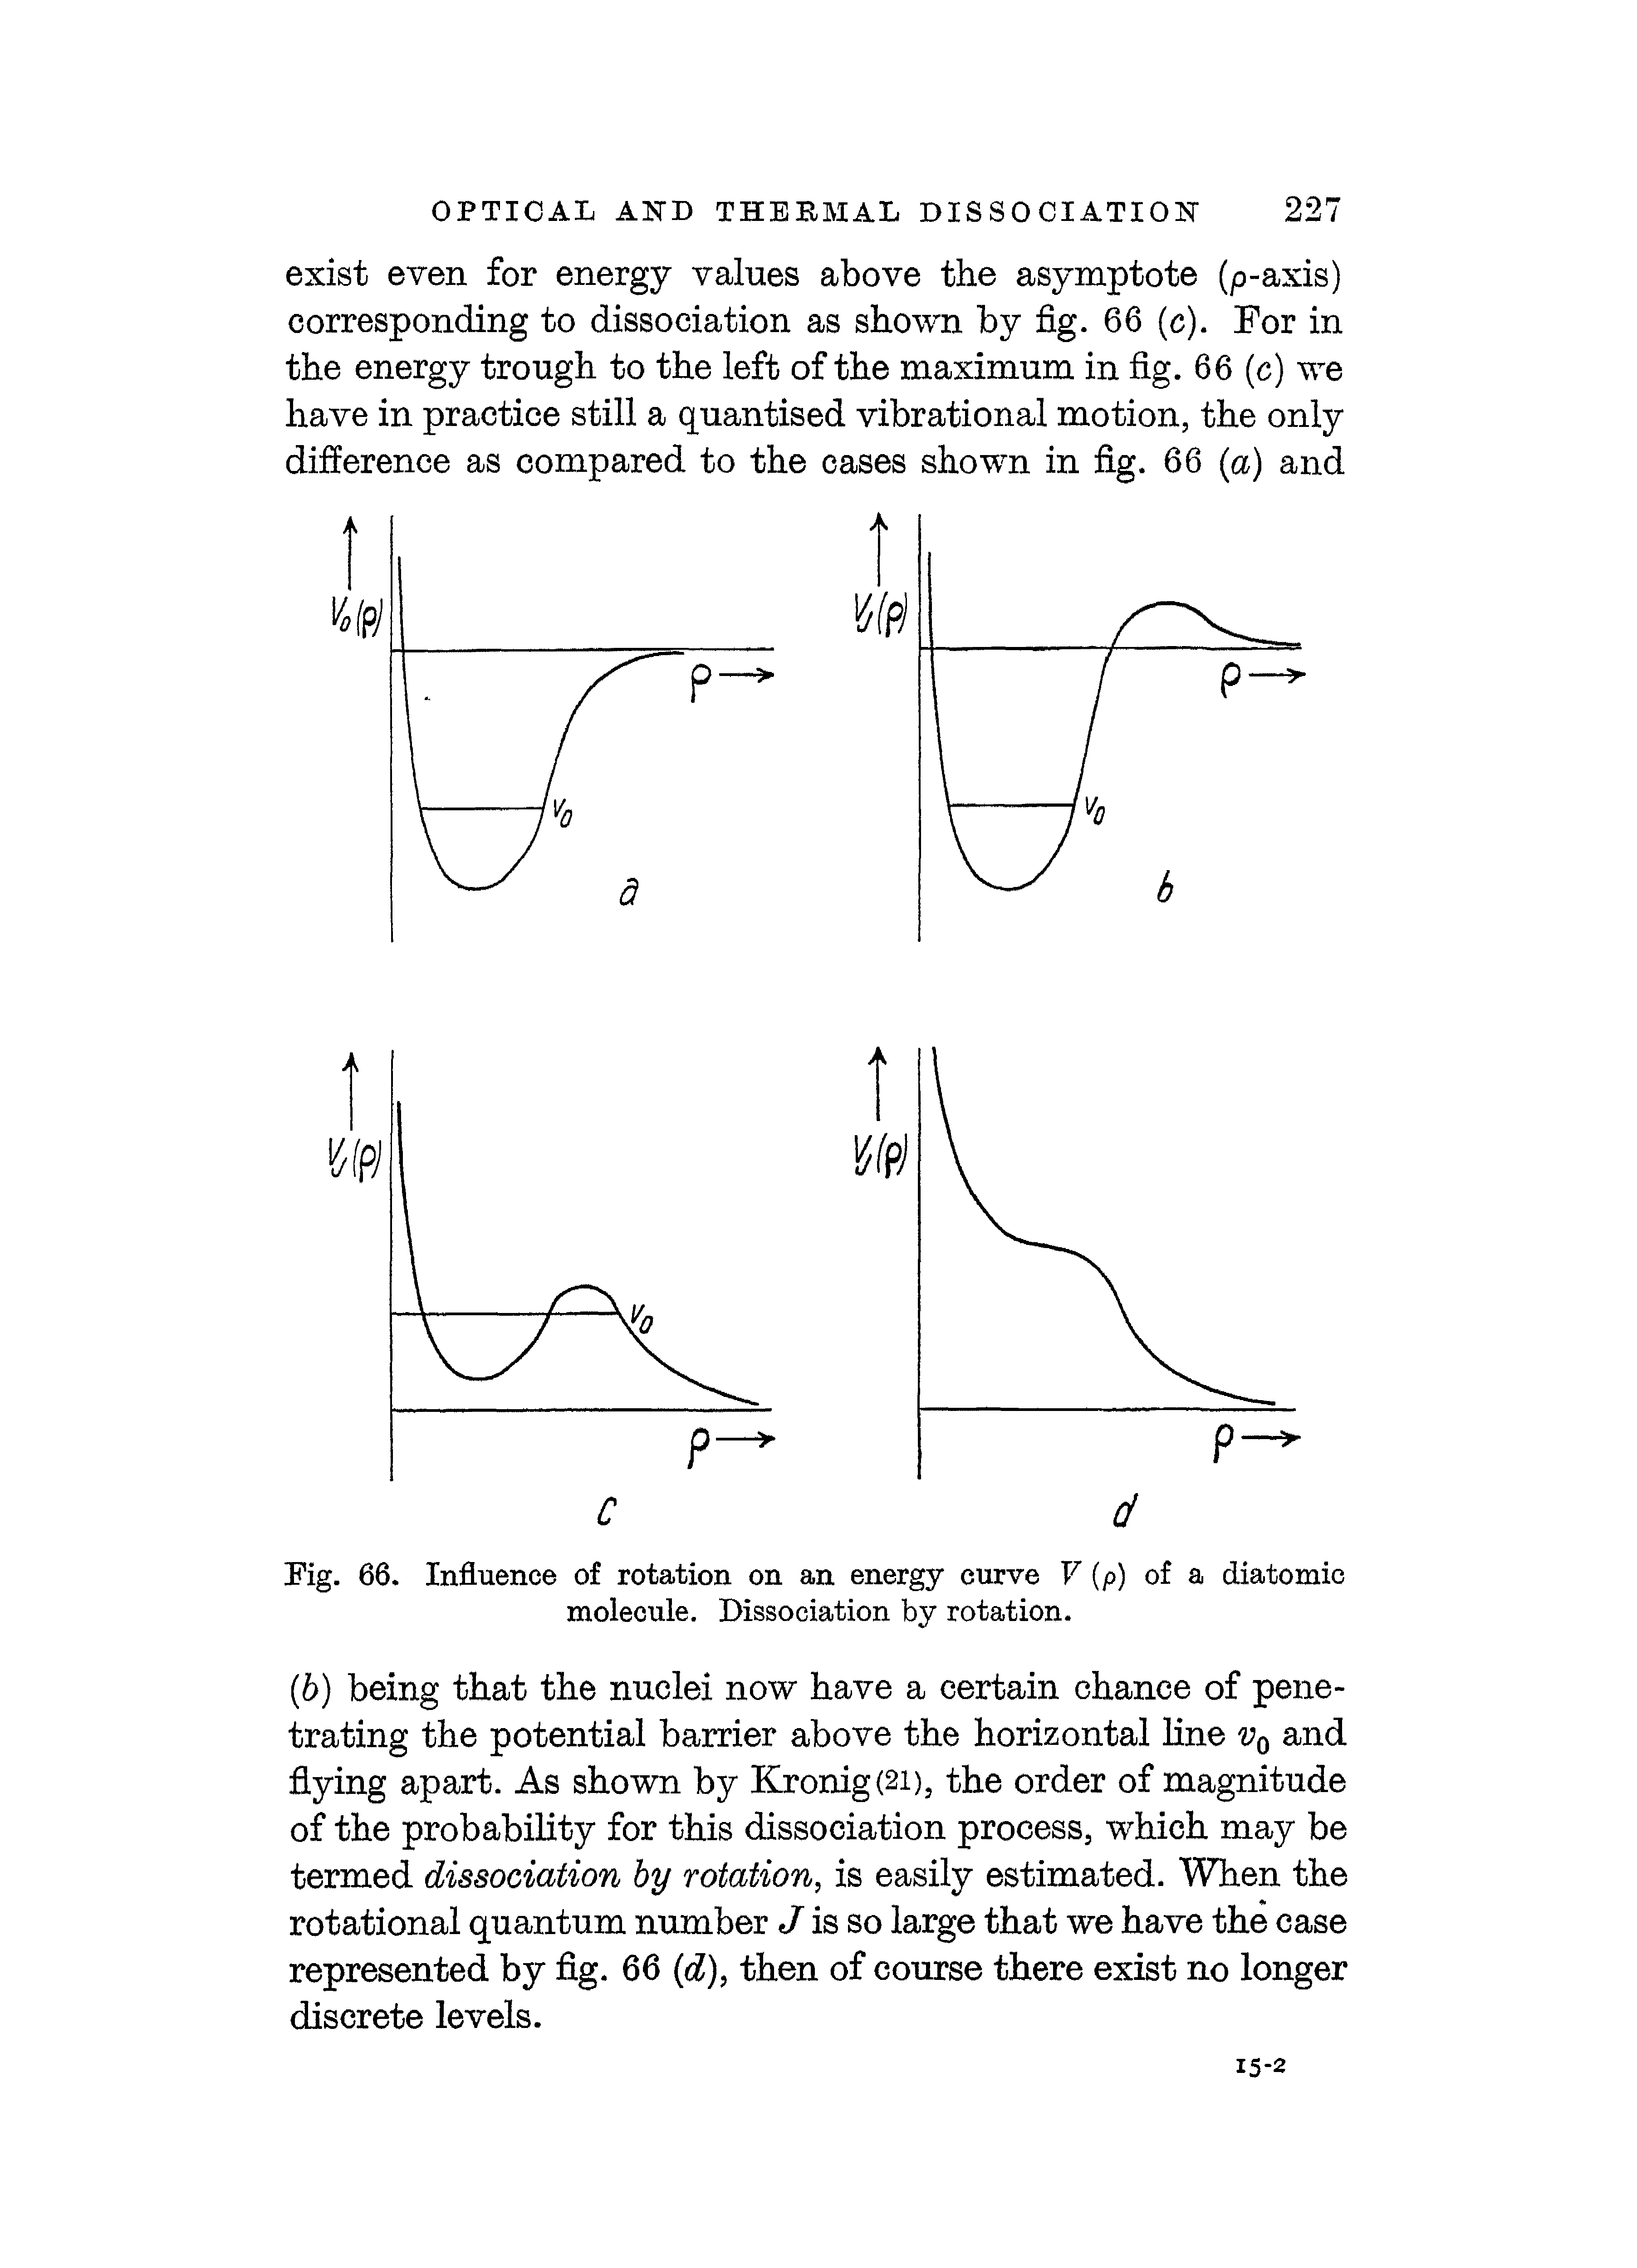 Fig. 66. Influence of rotation on an energy curve V (p) of a diatomic molecule. Dissociation by rotation.